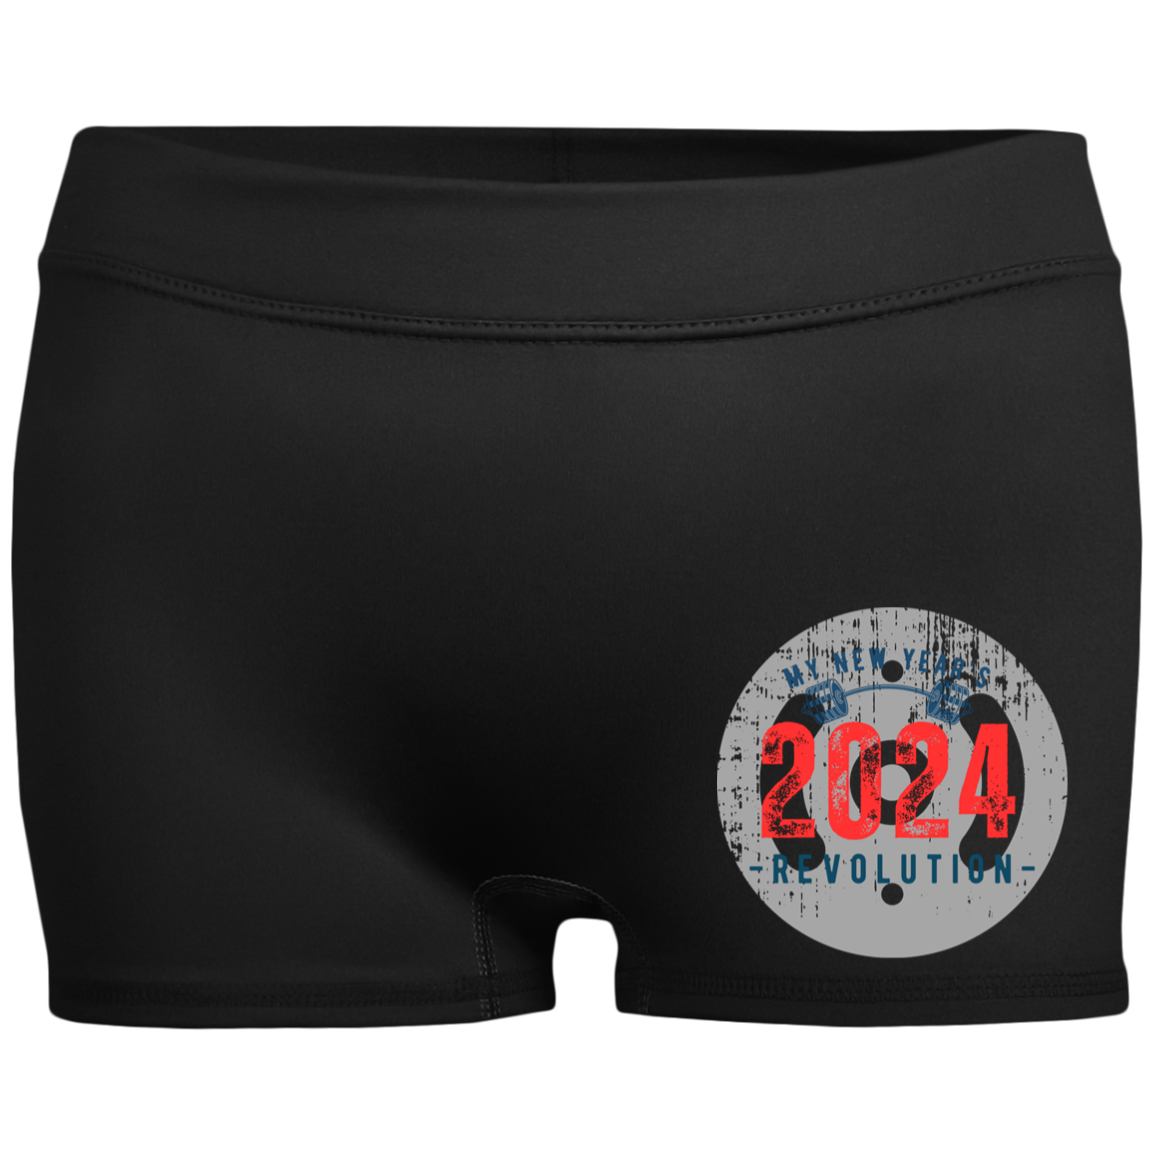 2024 New Year's Revolution Ladies' Fitted Moisture-Wicking 2.5 inch Inseam Shorts